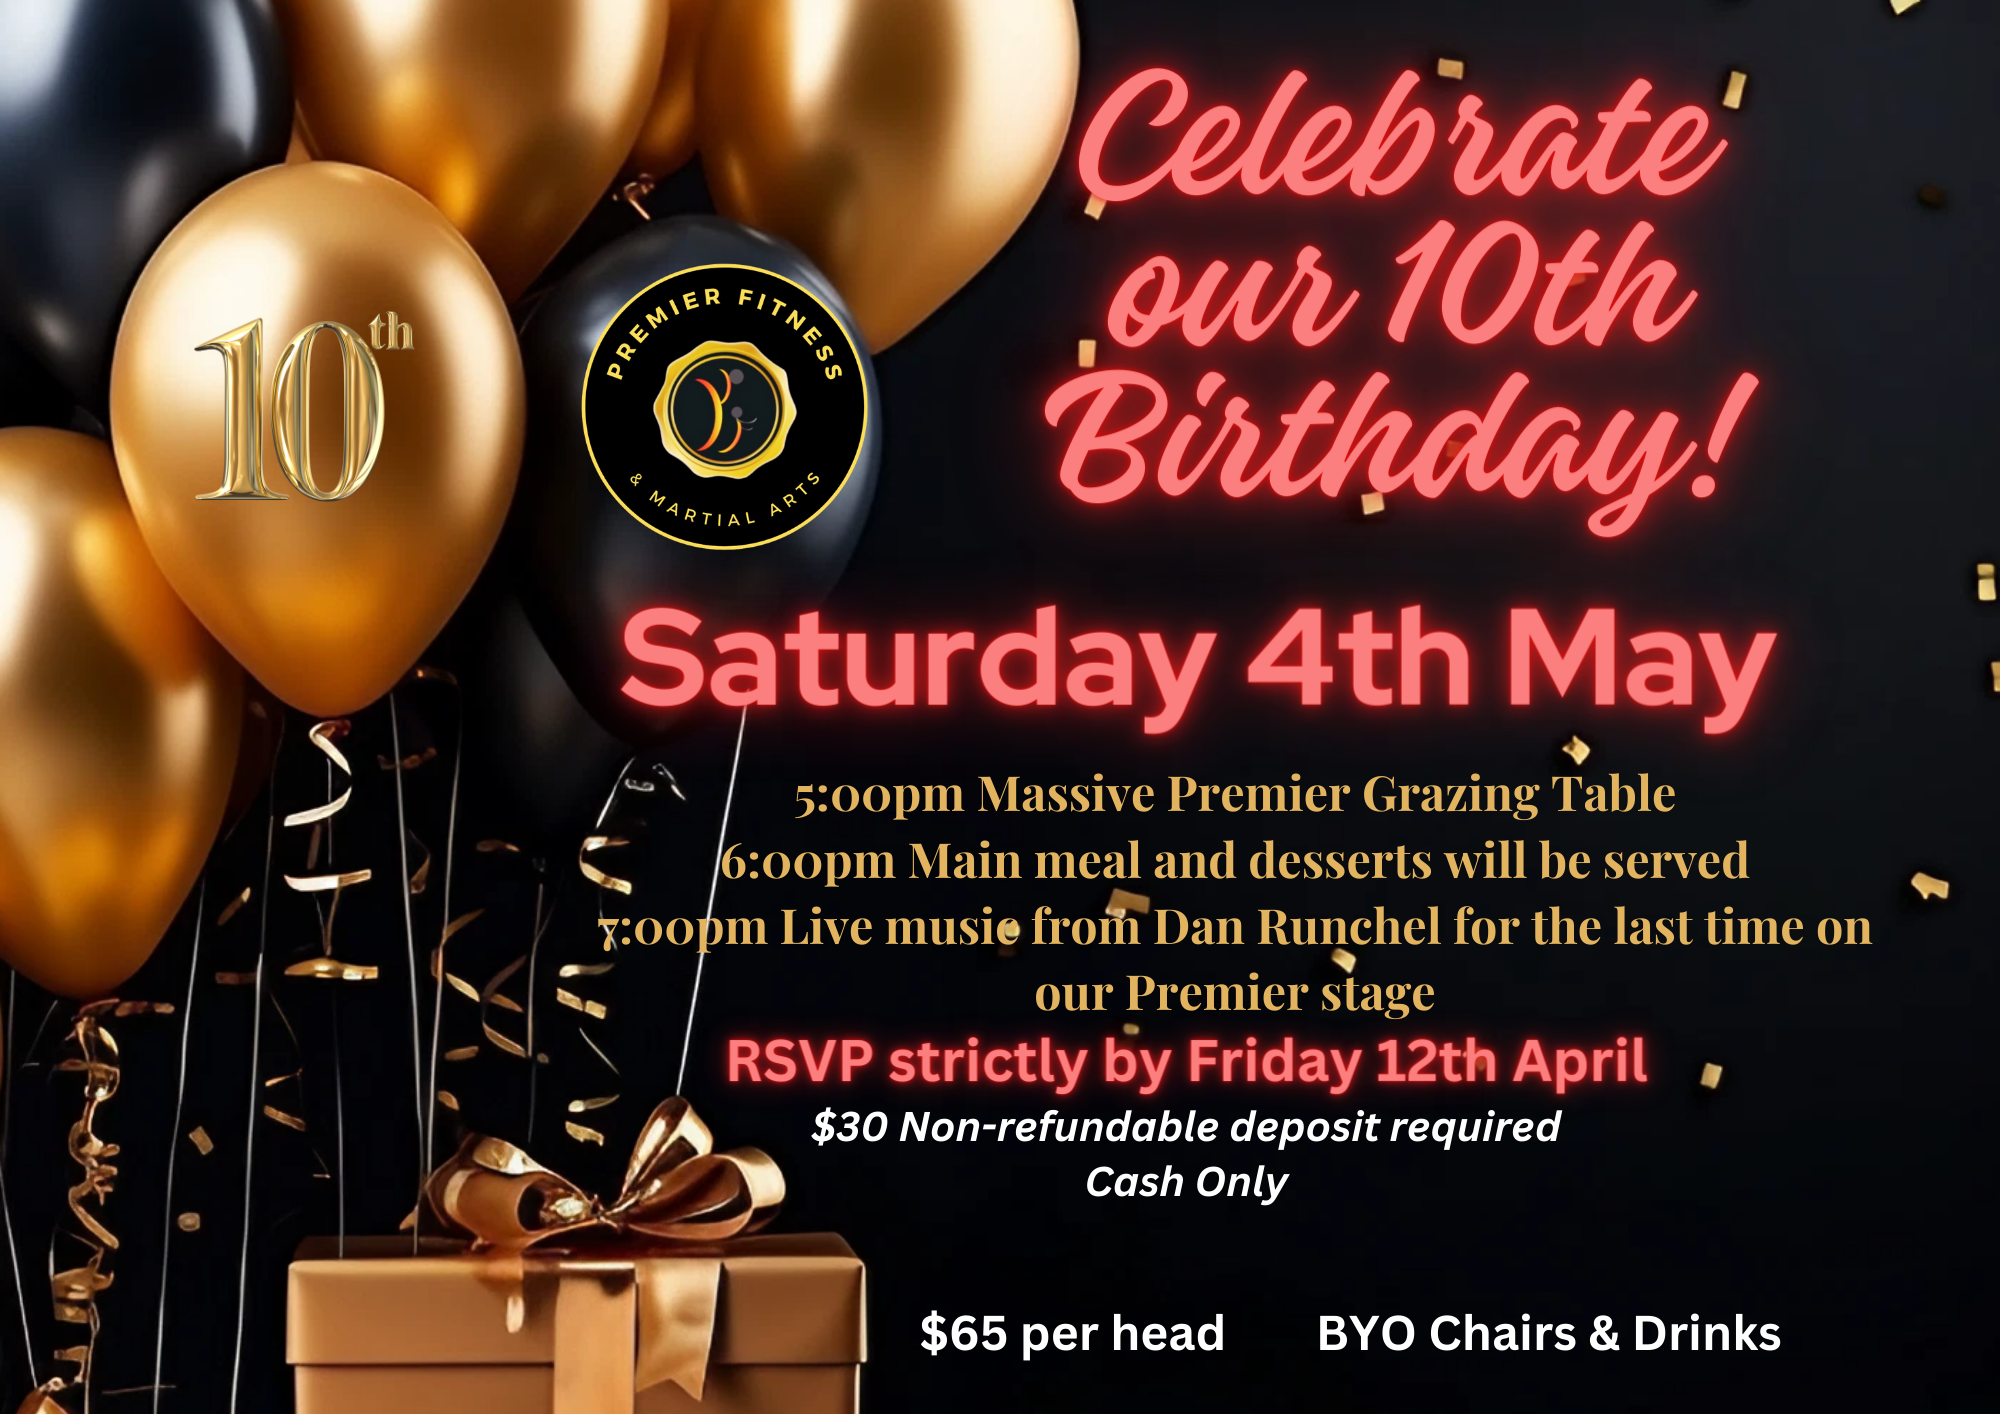 Premier Fitness and Martial Arts 10th Birthday Party Invitation